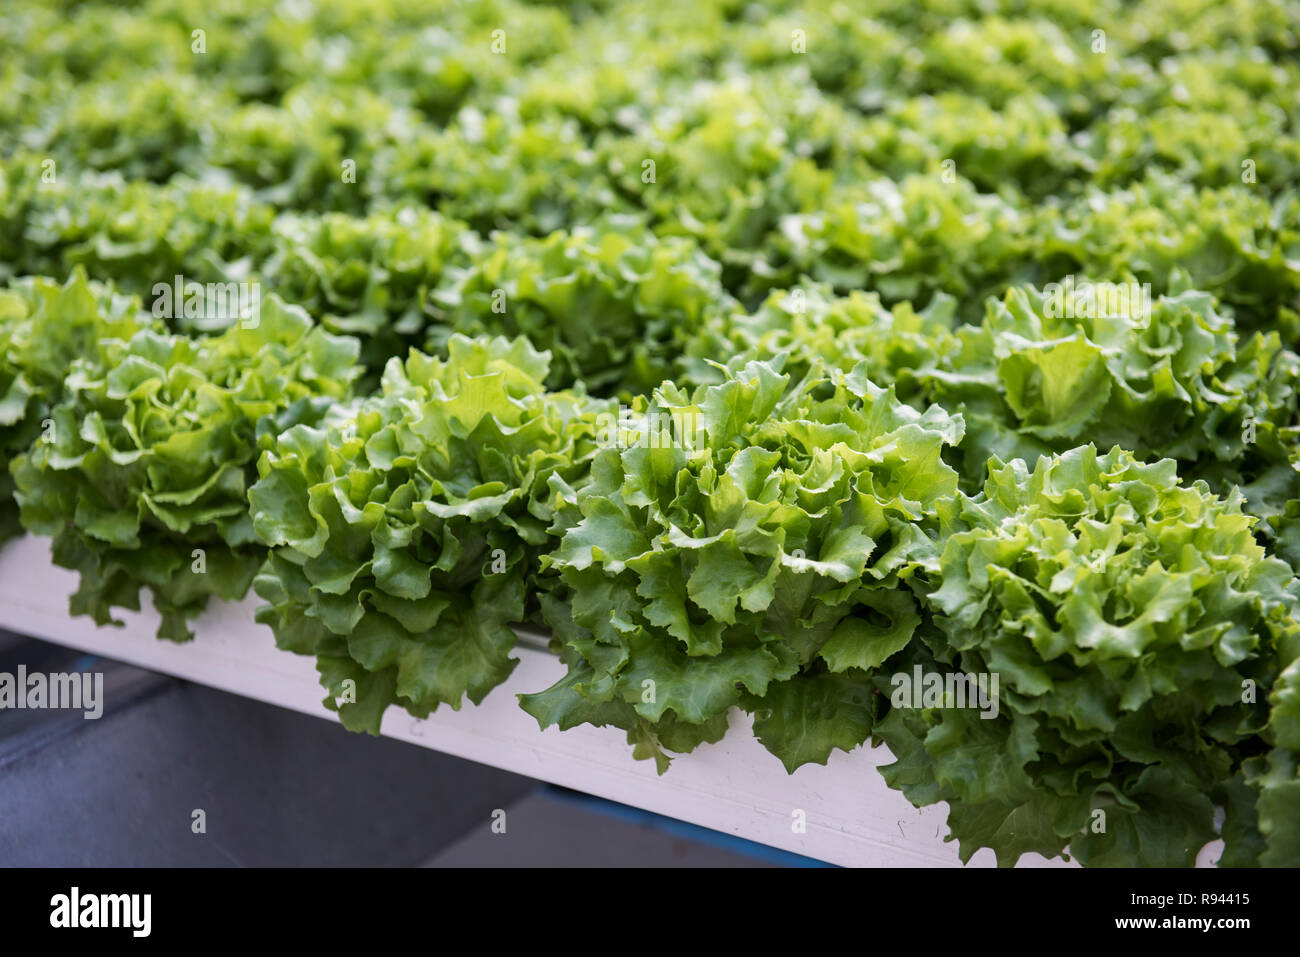 Hydroponics Style of Cultivation Stock Photo